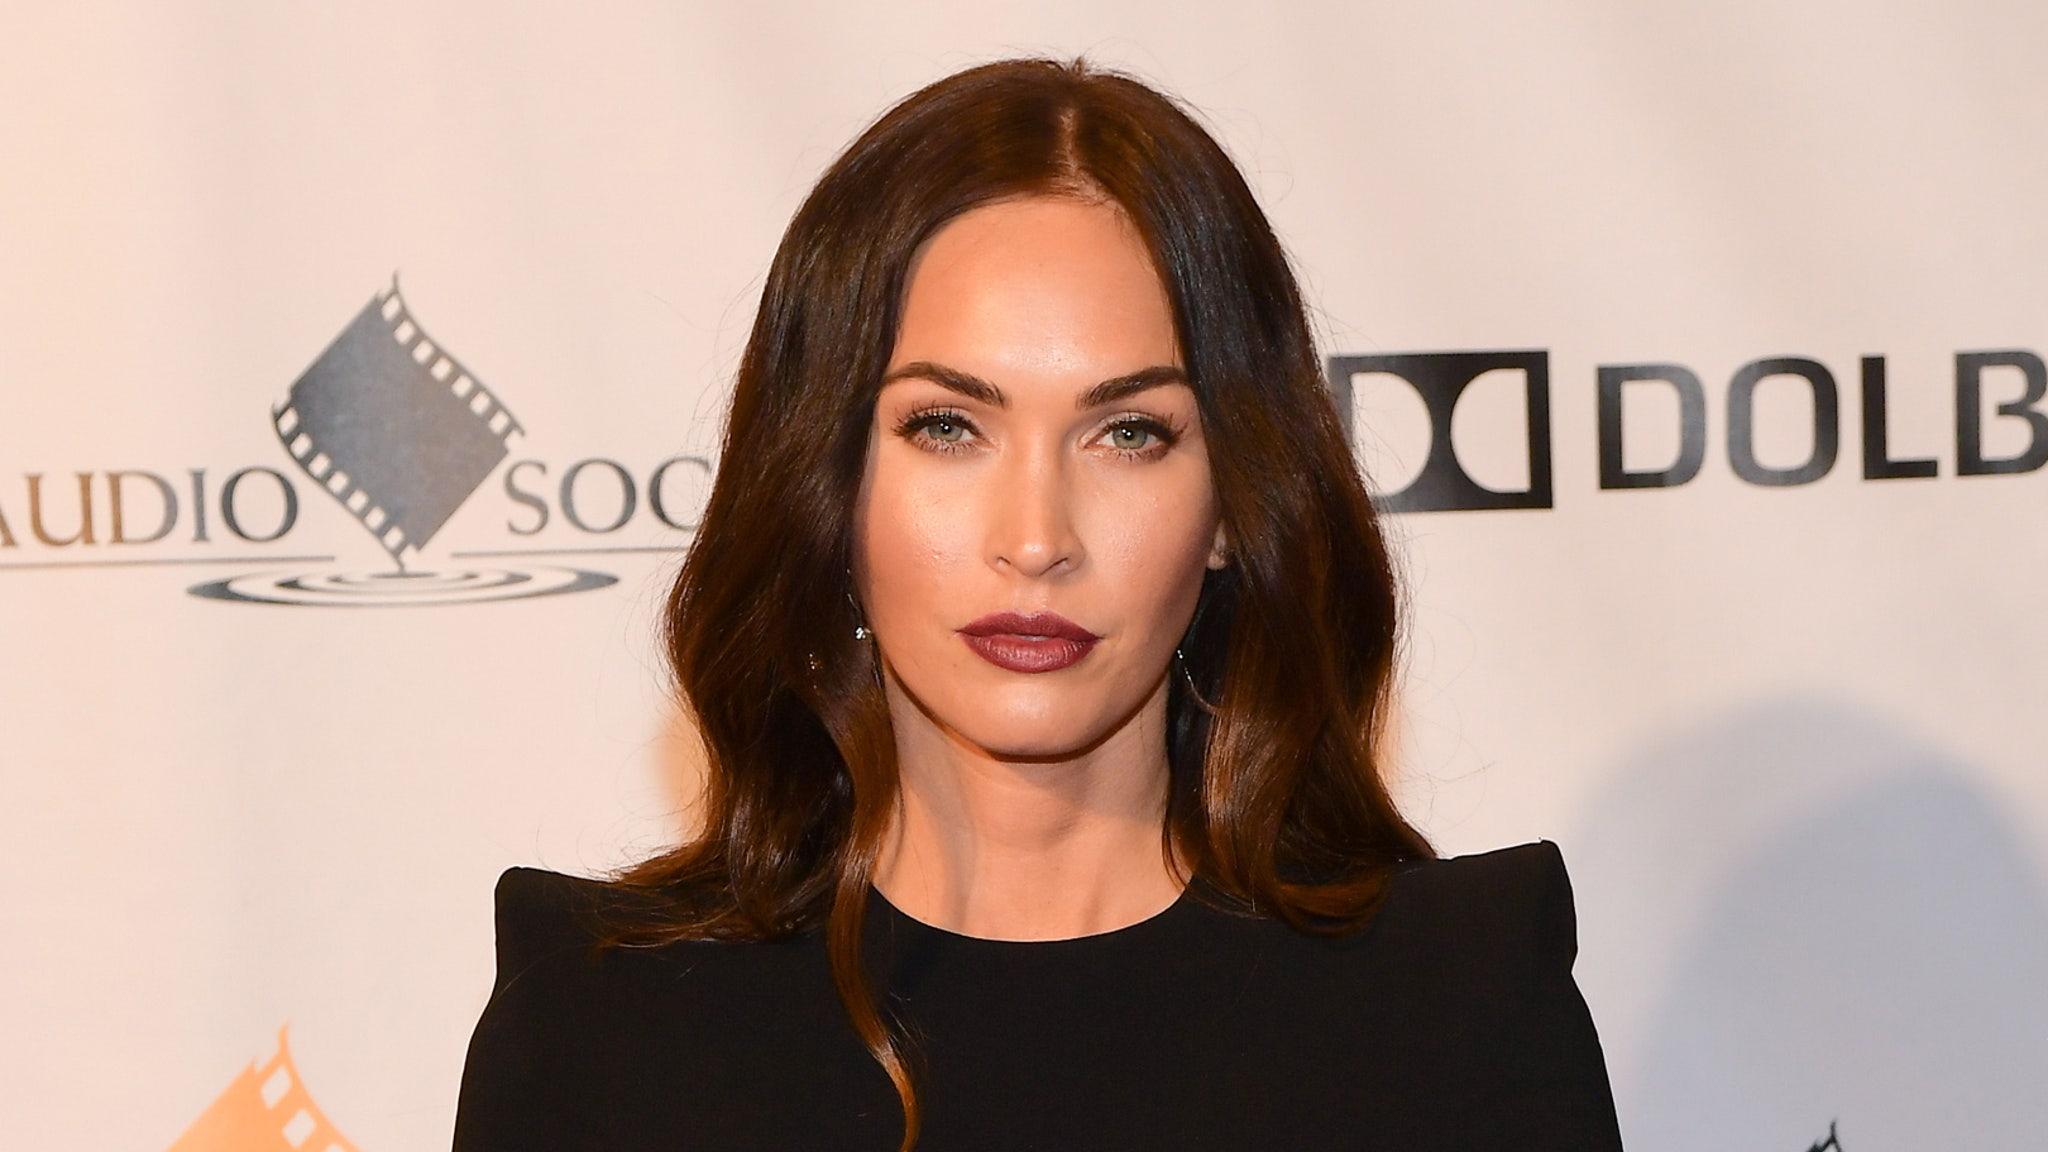 Megan Fox responds after being “socially crucified” by a fake anti-mask post